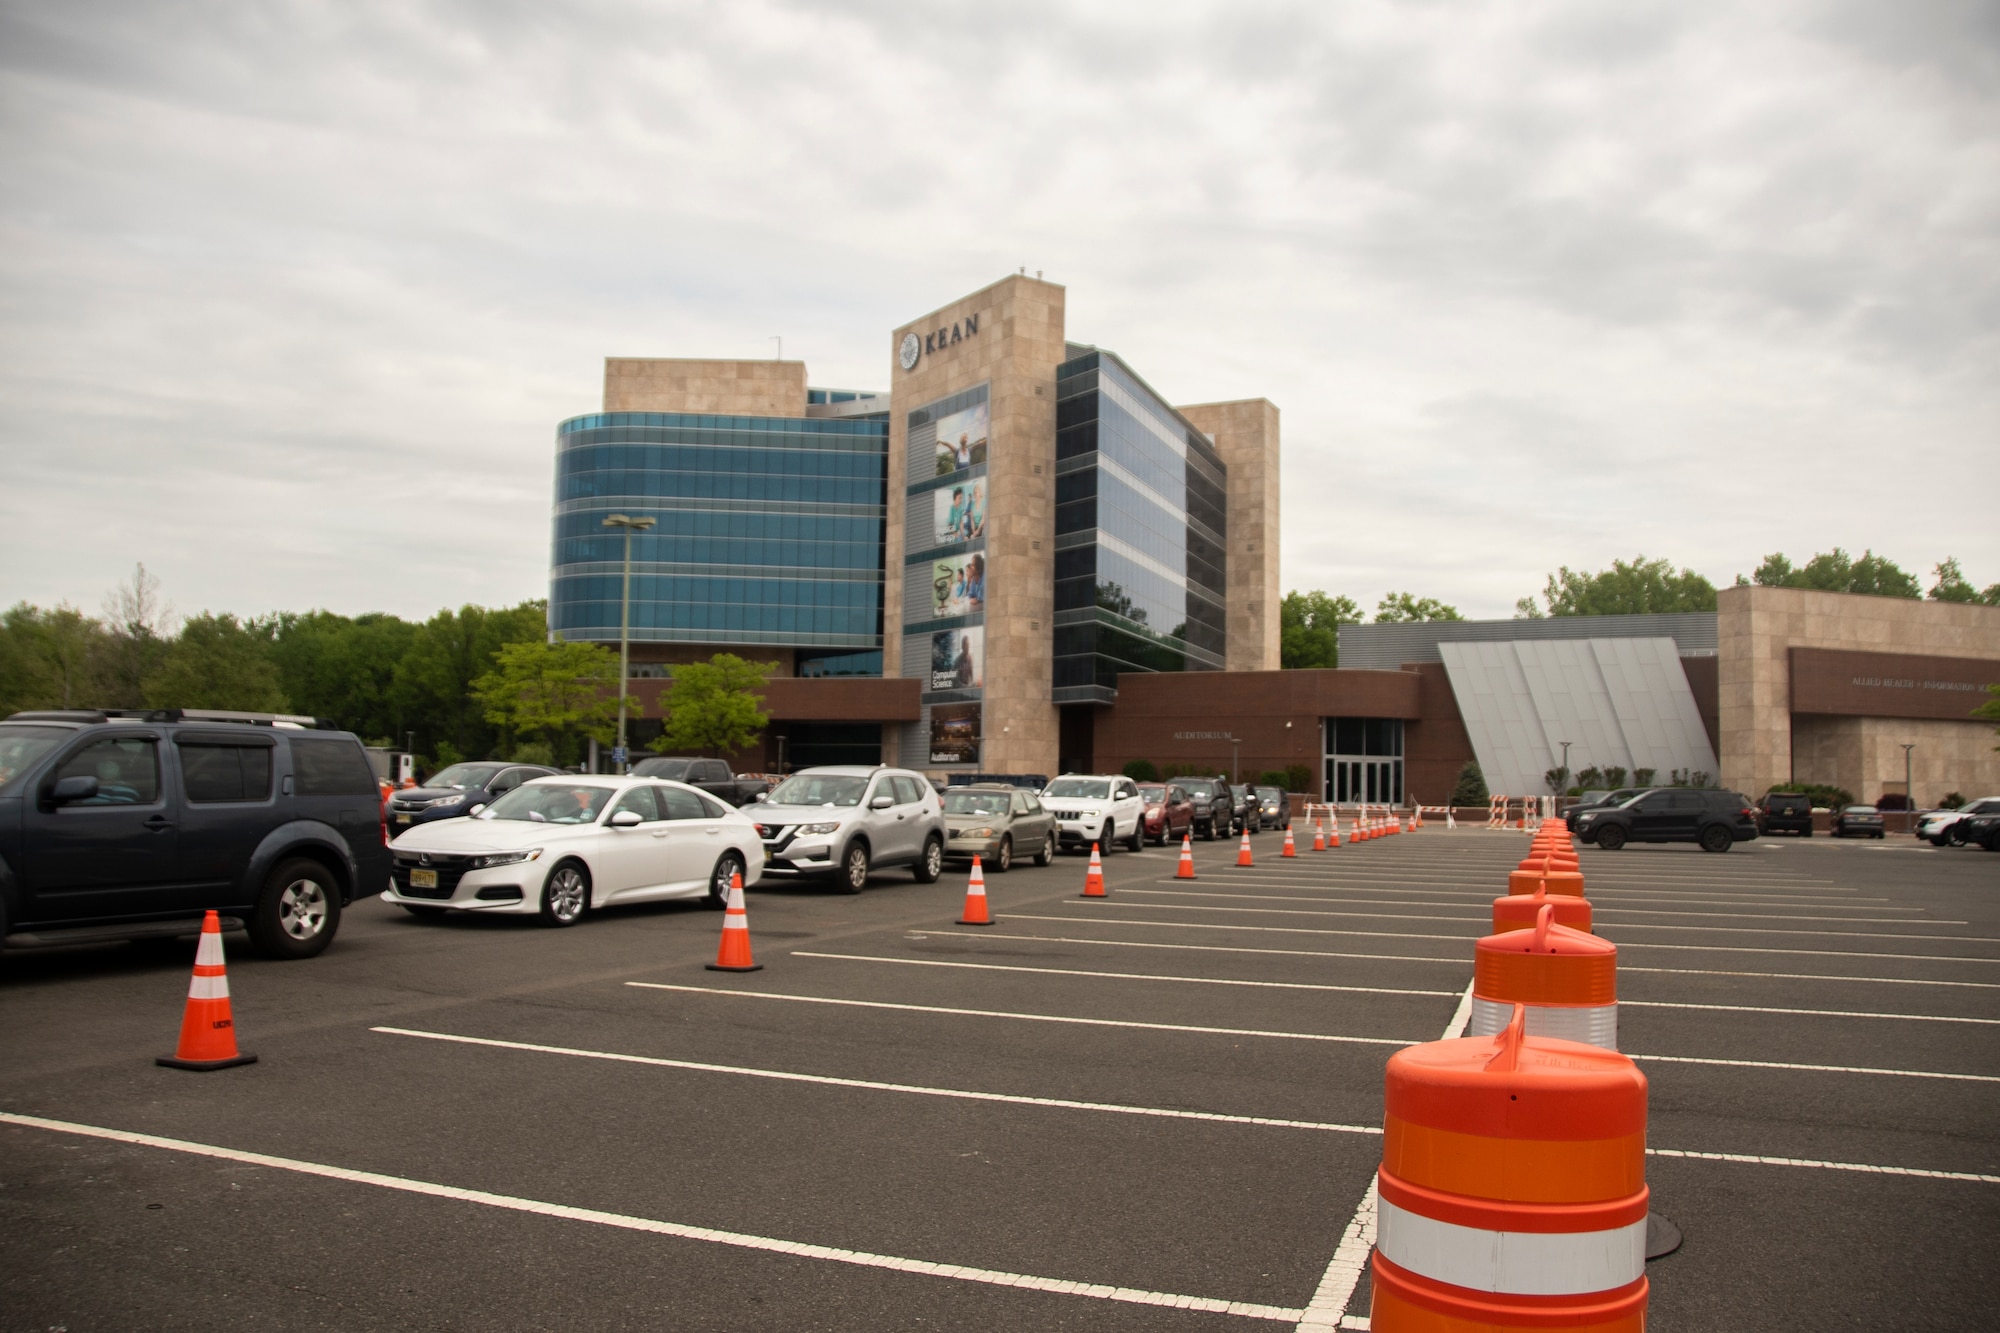 Cars line up for testing at the Union County COVID-19 drive-through, testing site located at Kean University in Union, N.J., May 18, 2020.  The New Jersey National Guard is working with Union County to provide security and traffic control at Kean University. (U.S. Air National Guard photo by Senior Airman Julia Santiago)